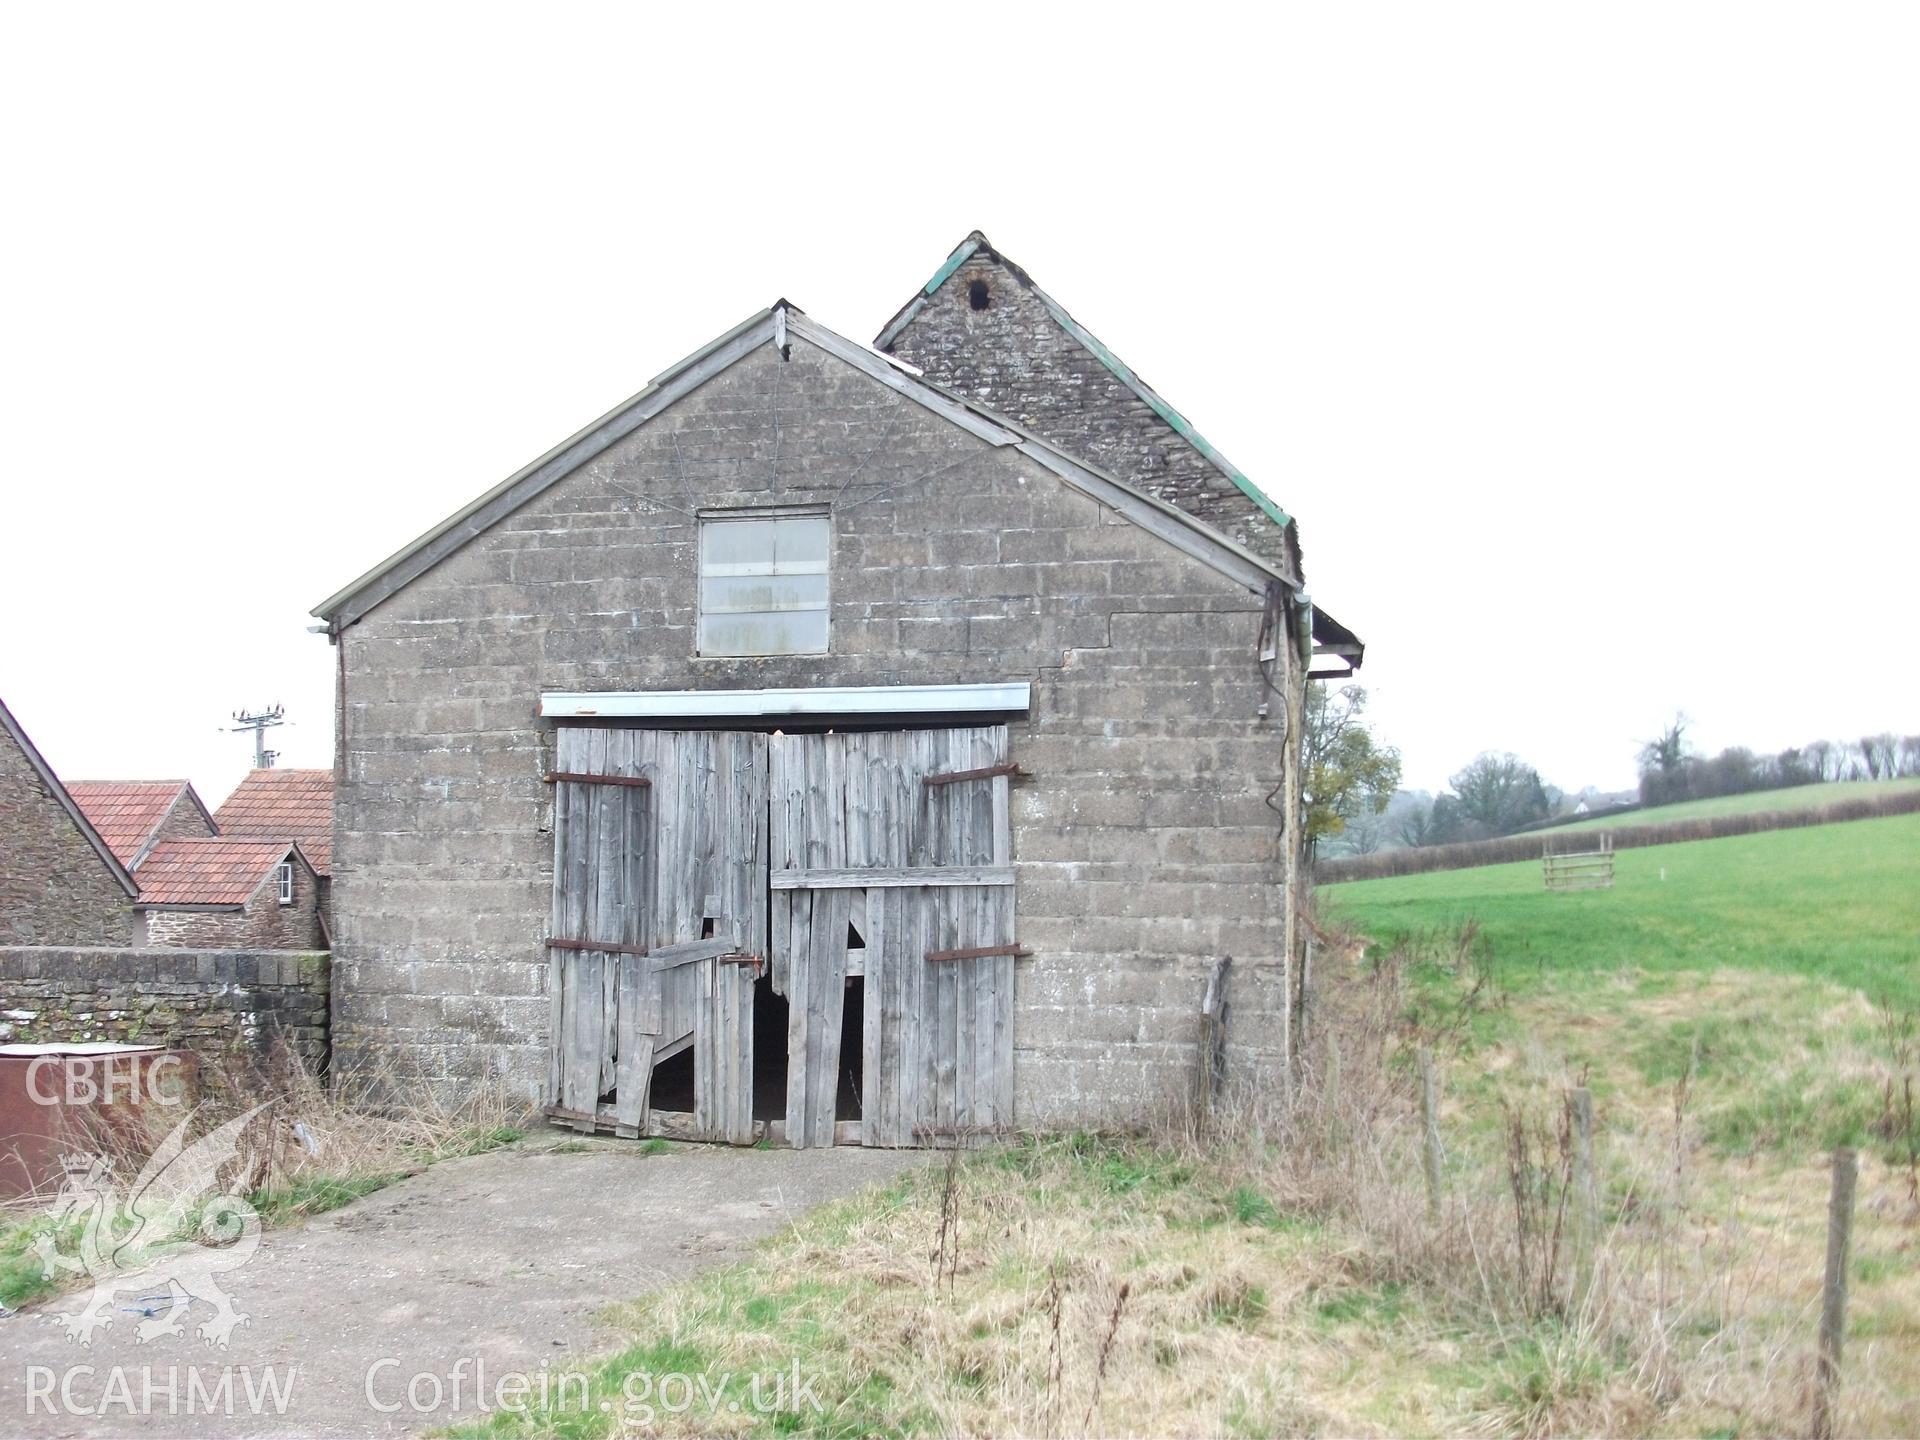 Colour digital photograph of exterior of barns at Llangwm Isaf Farm, received in the course of Emergency Recording case ref no RCS2/1/1599.